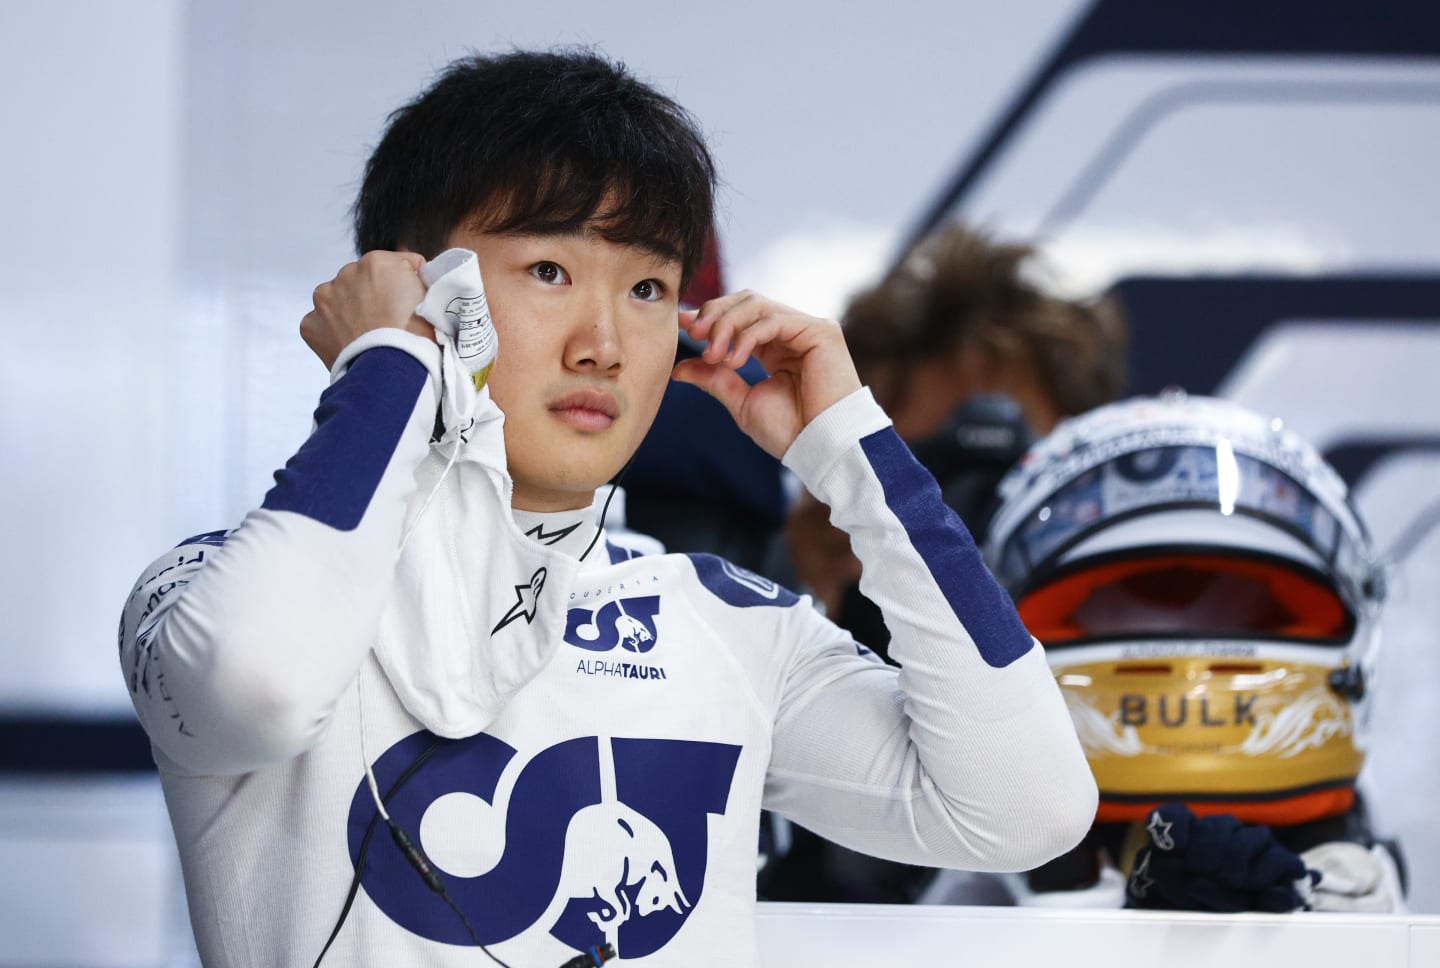 SUZUKA, JAPAN - OCTOBER 07: Yuki Tsunoda of Japan and Scuderia AlphaTauri prepares to drive in the garage during practice ahead of the F1 Grand Prix of Japan at Suzuka International Racing Course on October 07, 2022 in Suzuka, Japan. (Photo by Clive Rose/Getty Images)